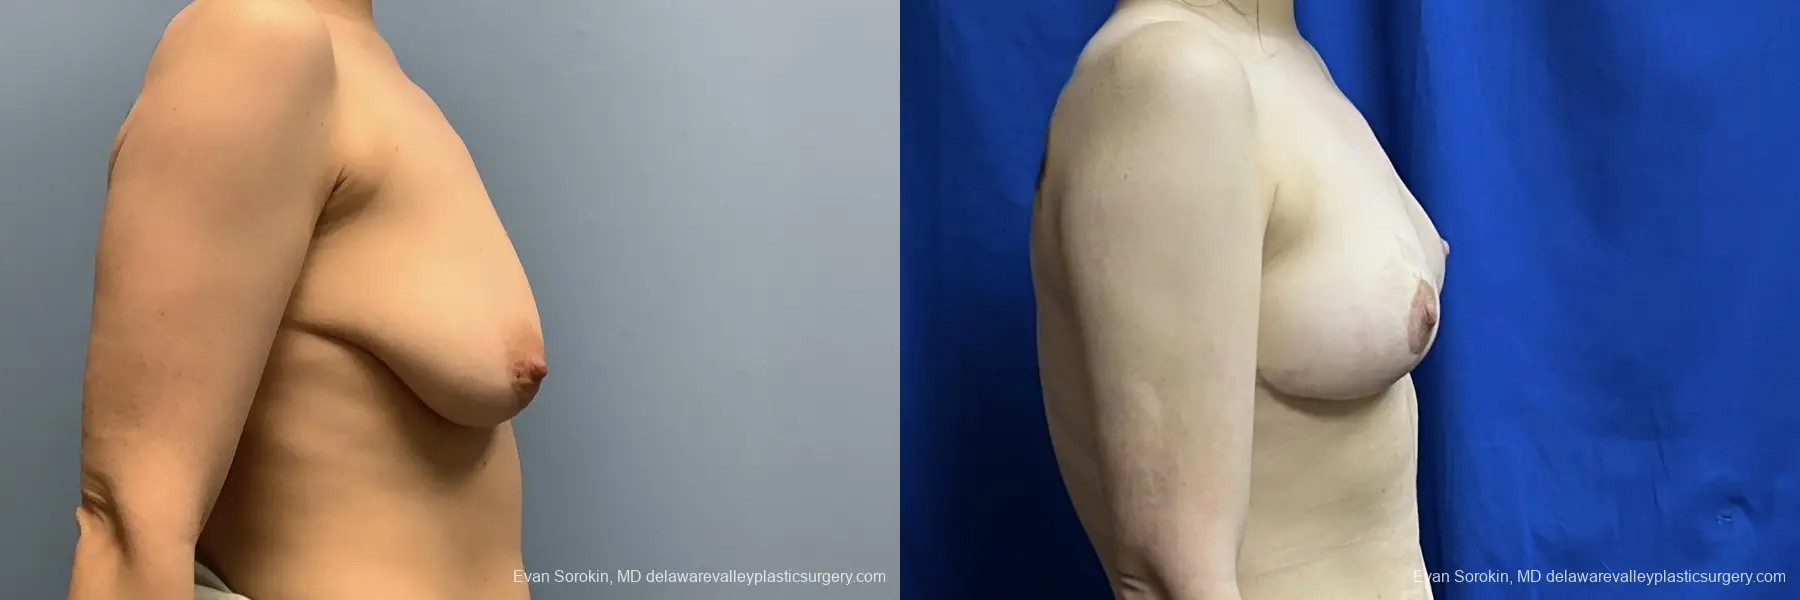 Breast Lift: Patient 3 - Before and After 3